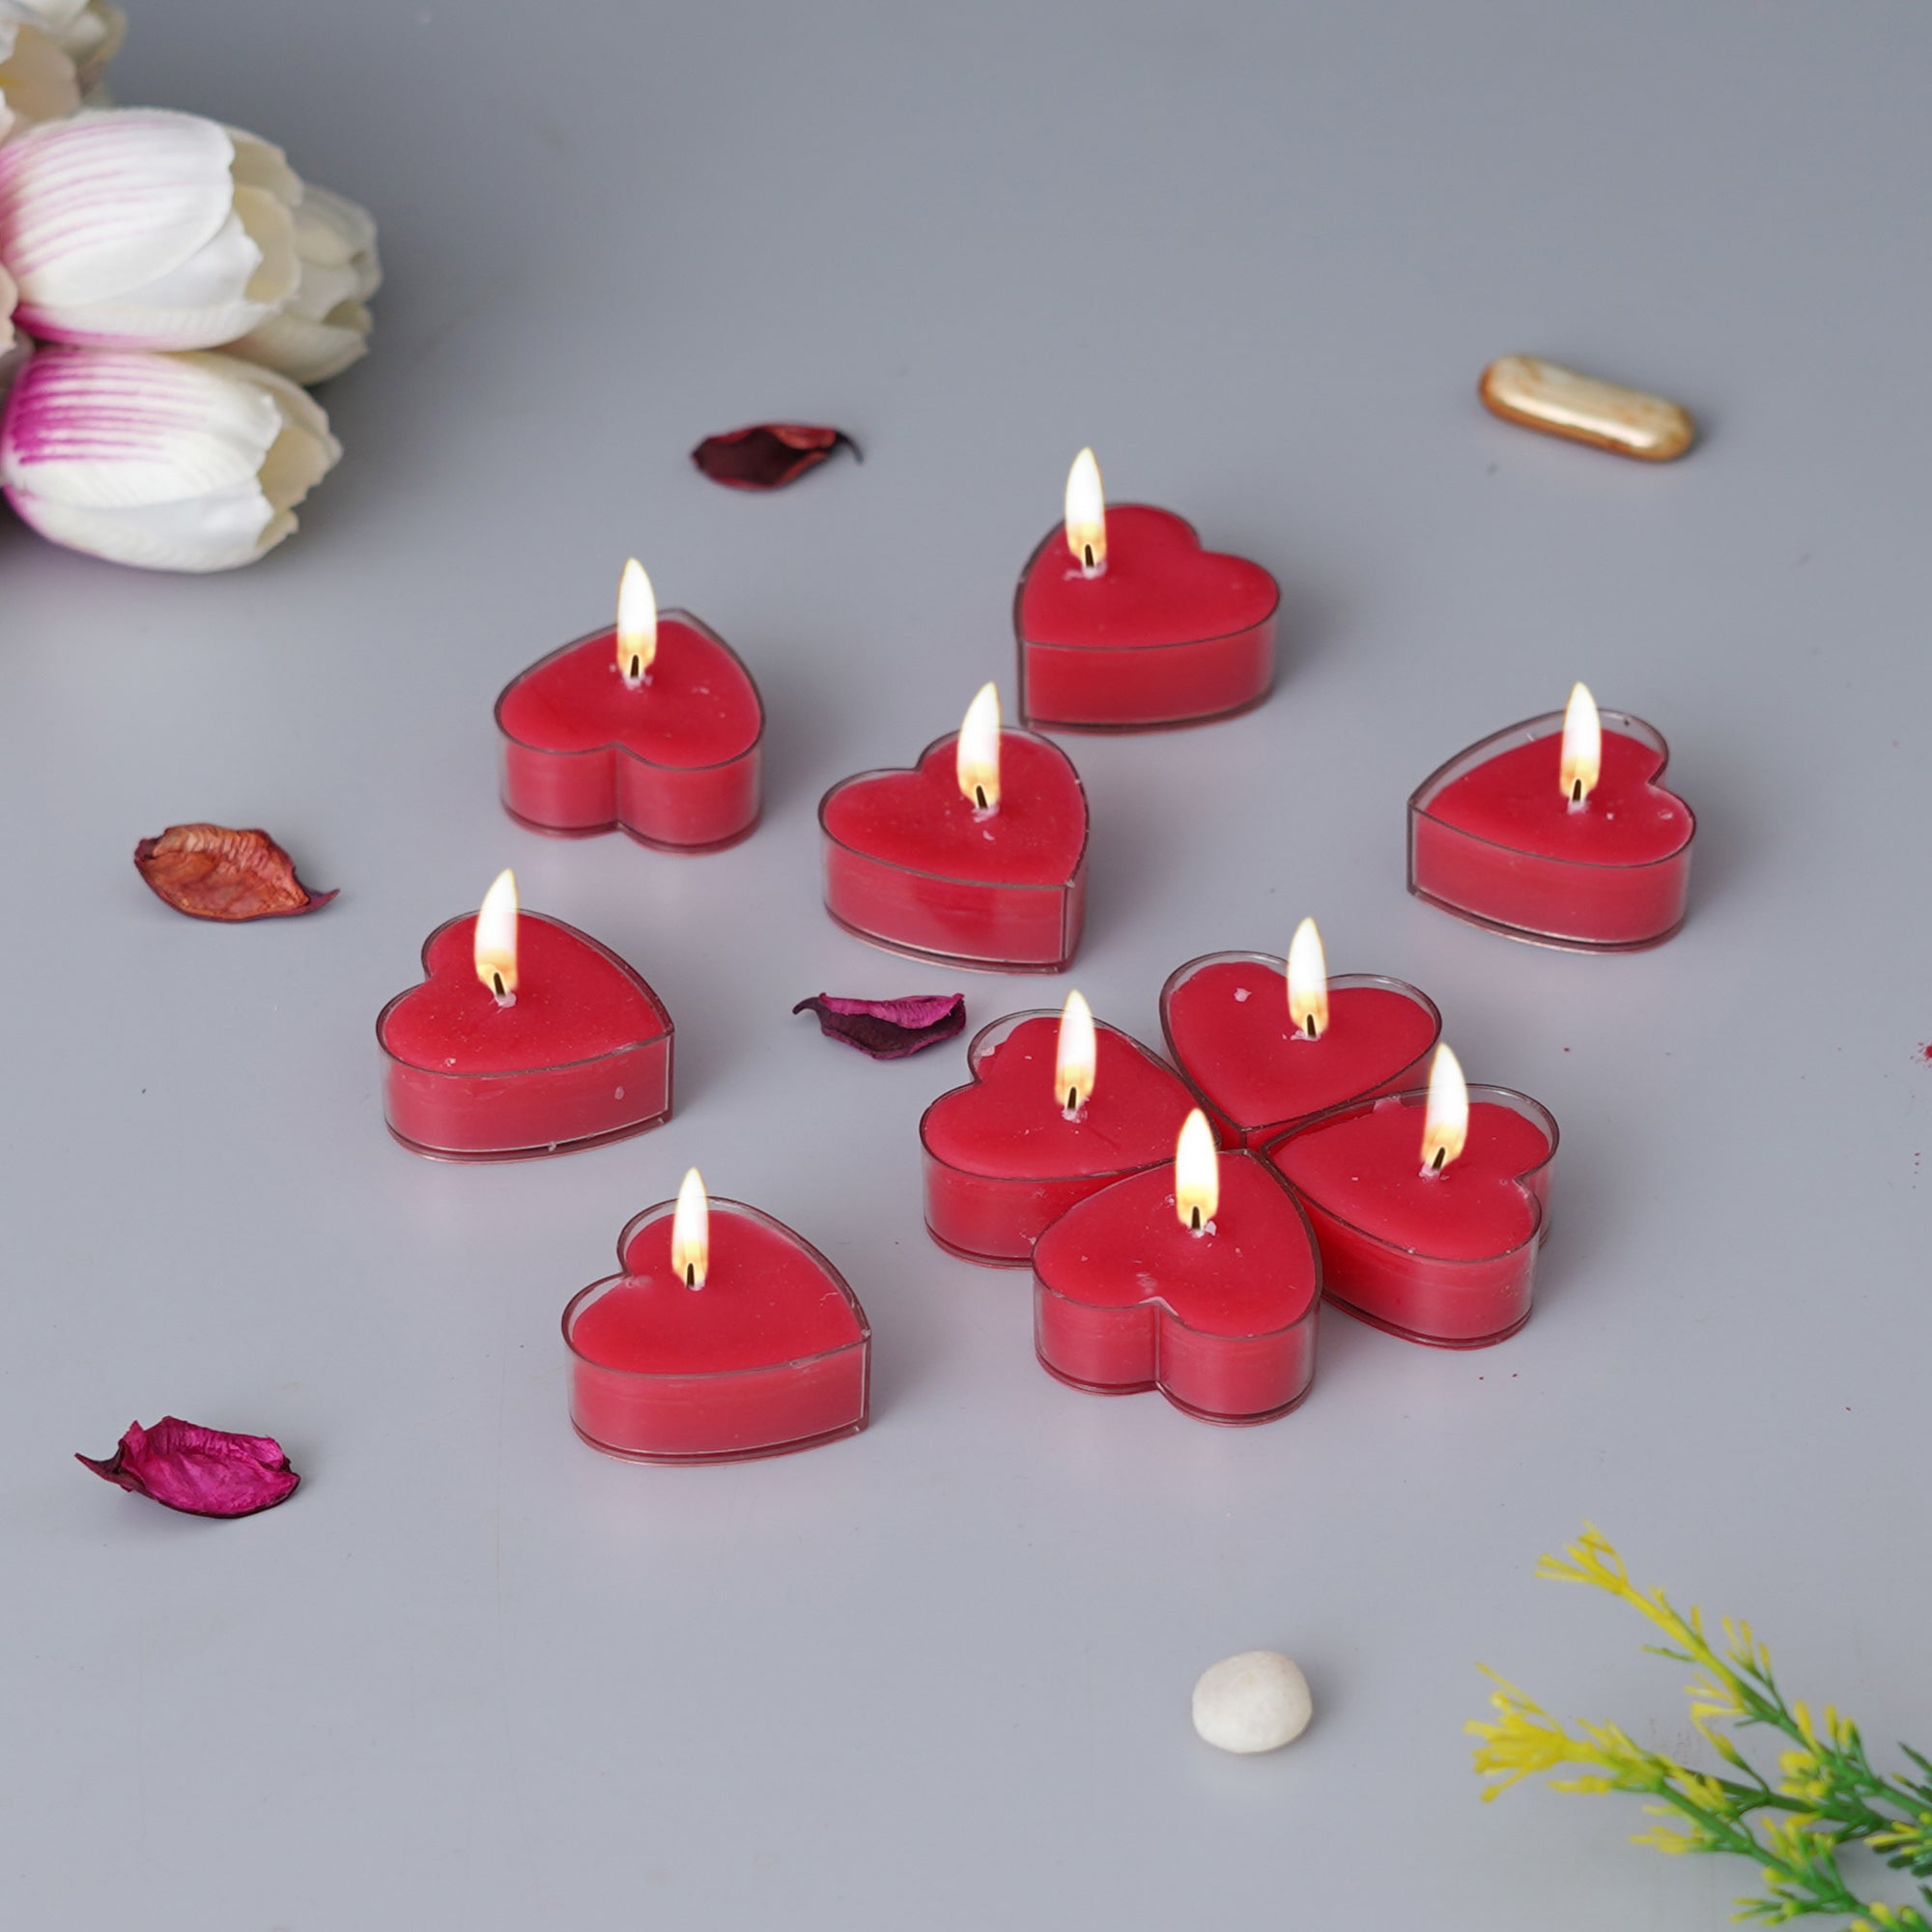 Set Of 100 Romantic Heart Shaped Rose Scented Tea Light Candles